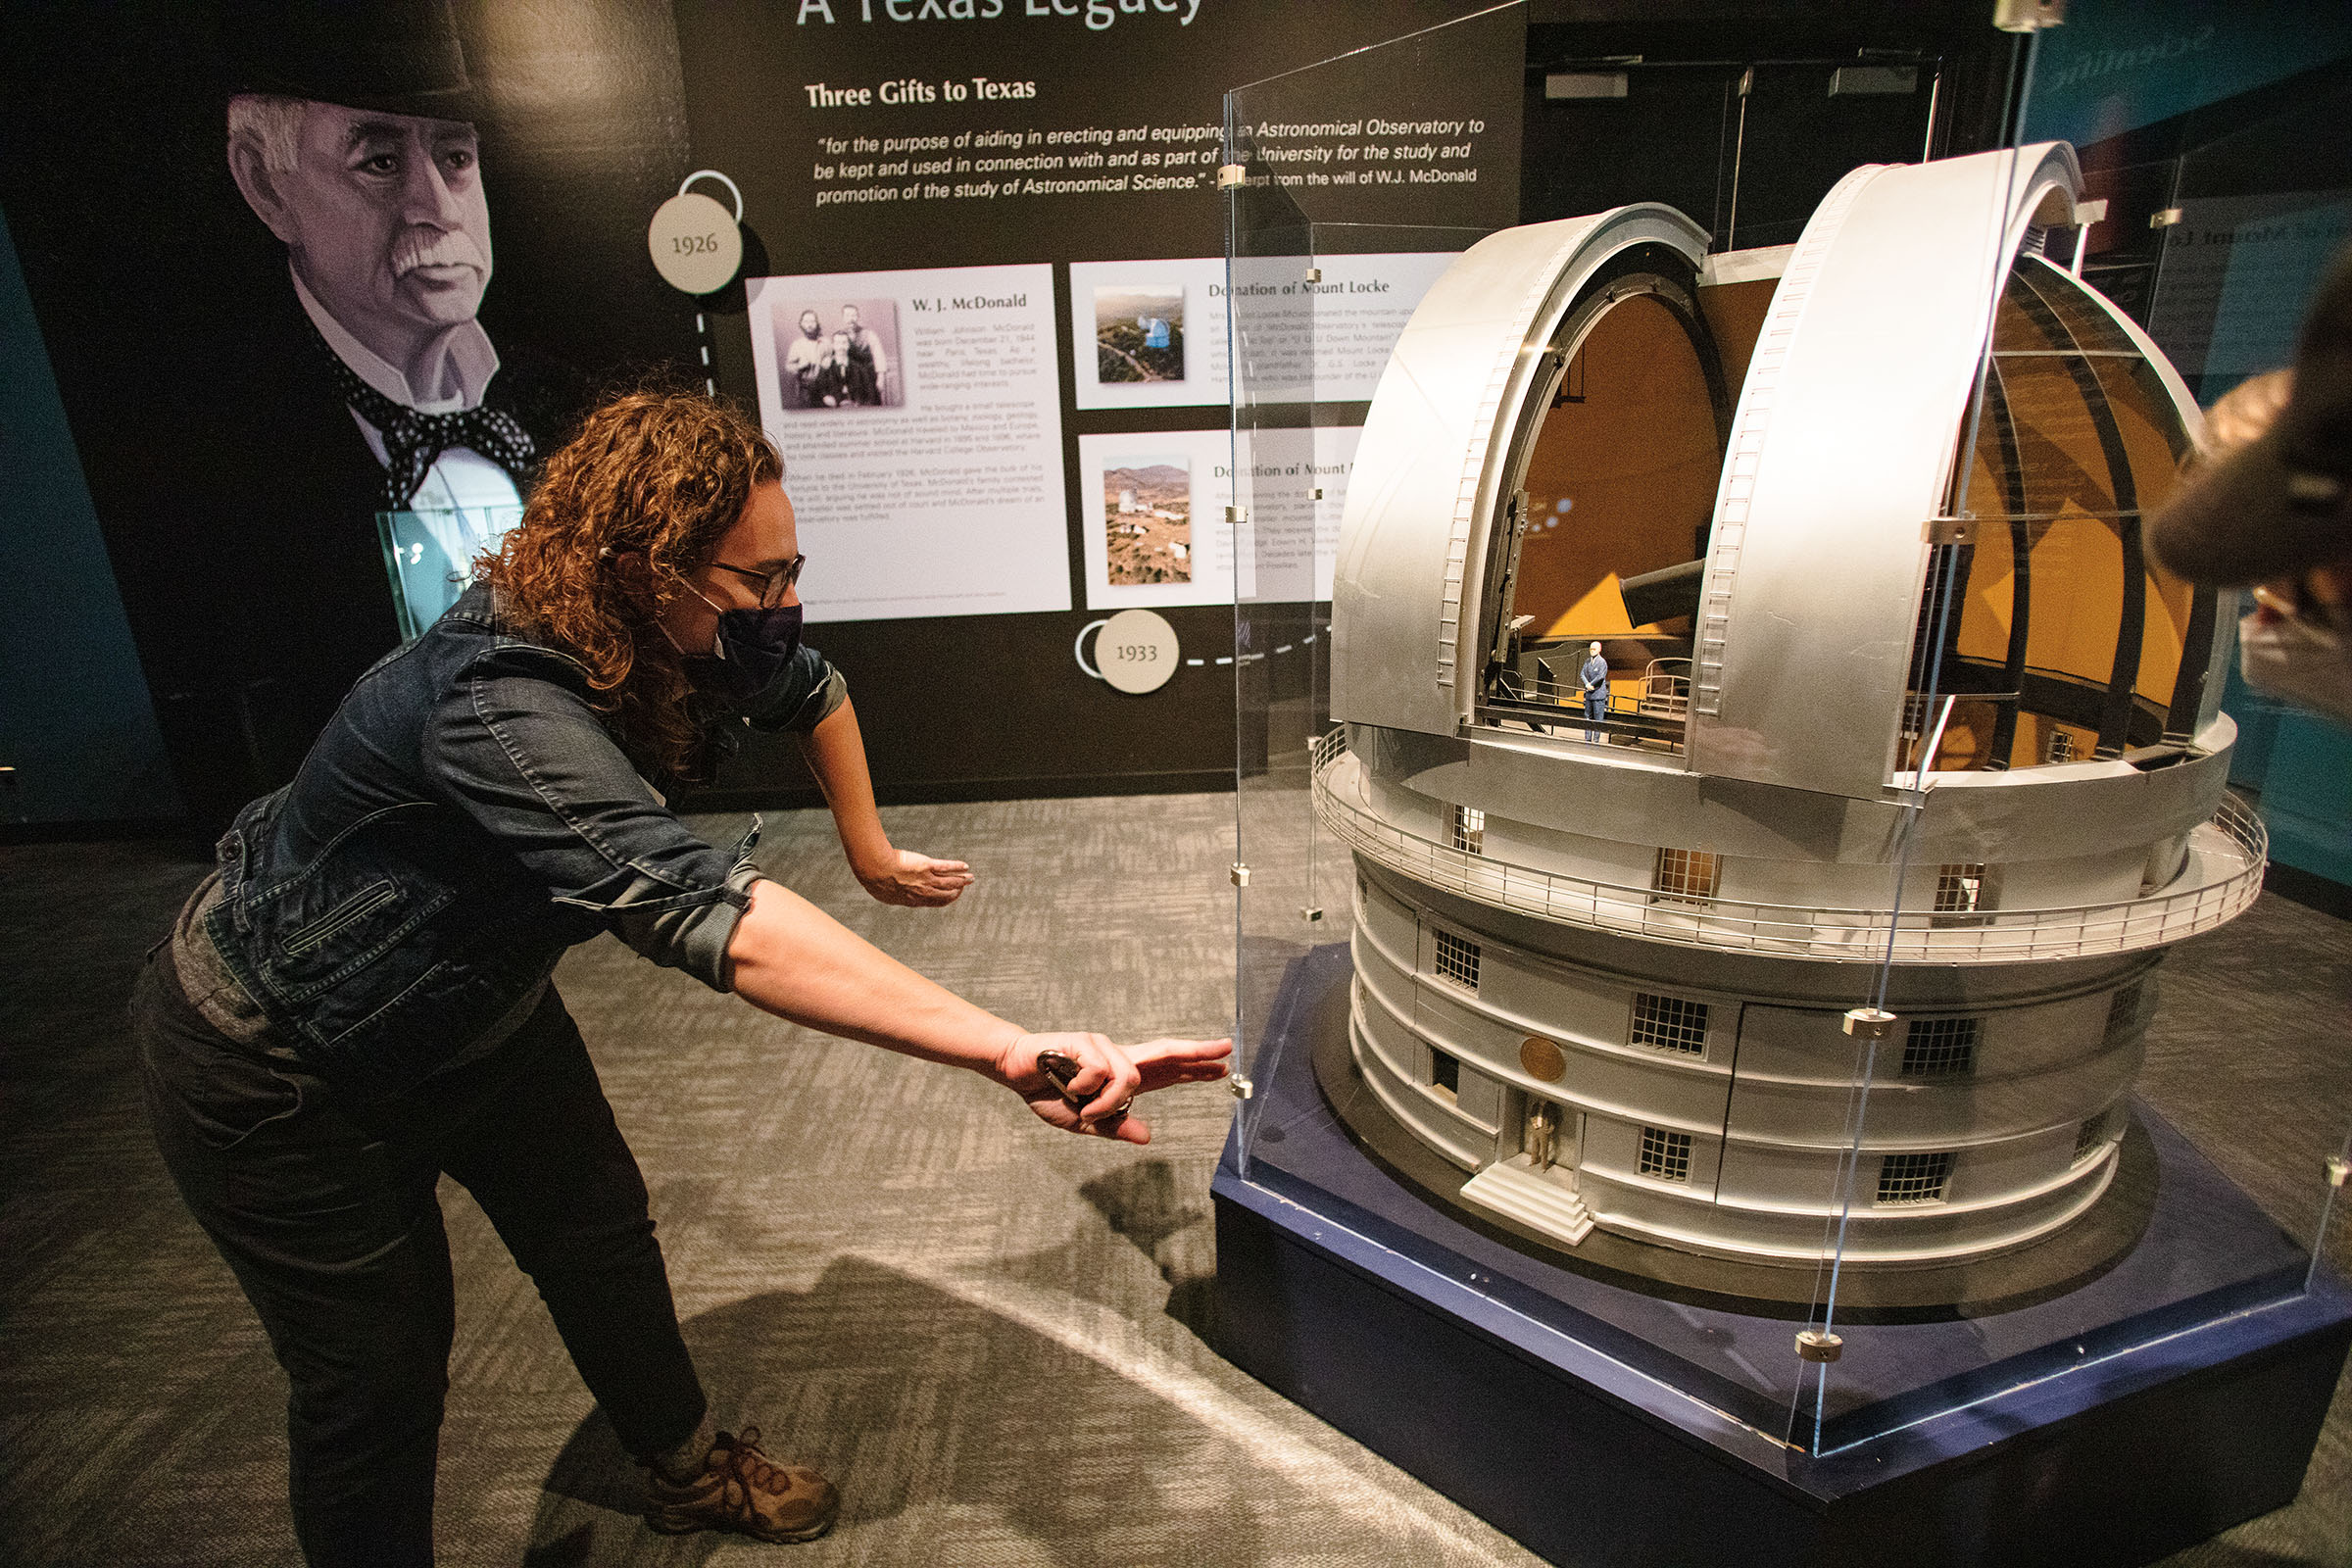 A picture of a person leaning over and pointing out features on a small-scale model of a white telescope